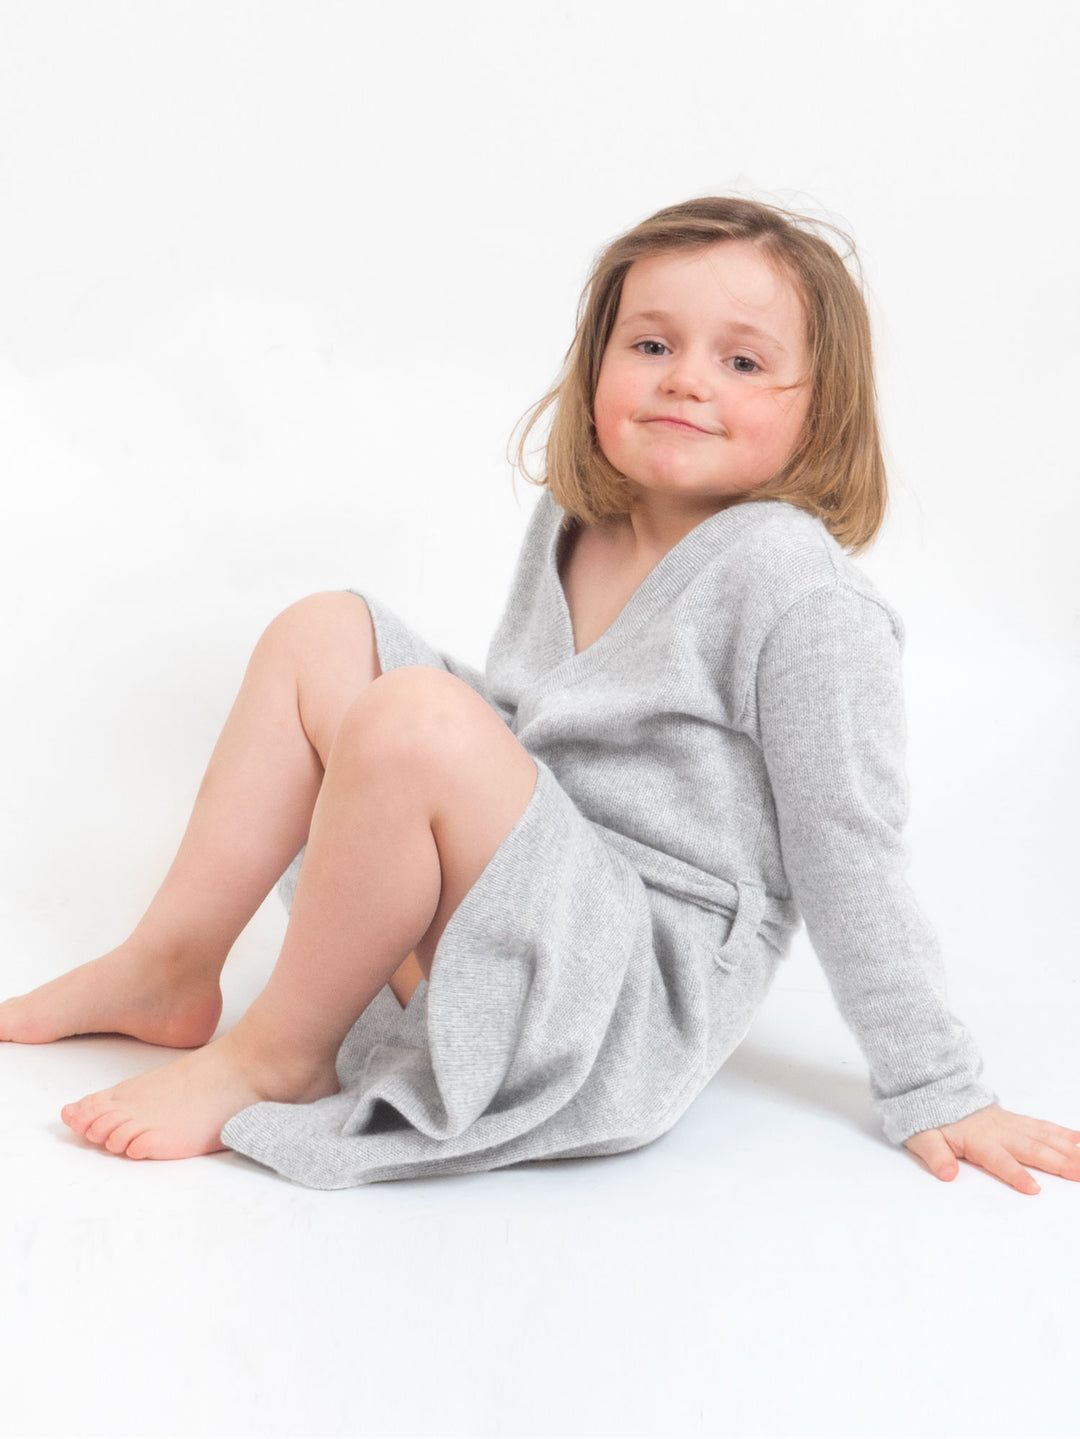 Cashmere robe for kids, 100% pure cashmere, soft, warm, non itching, Kashmina